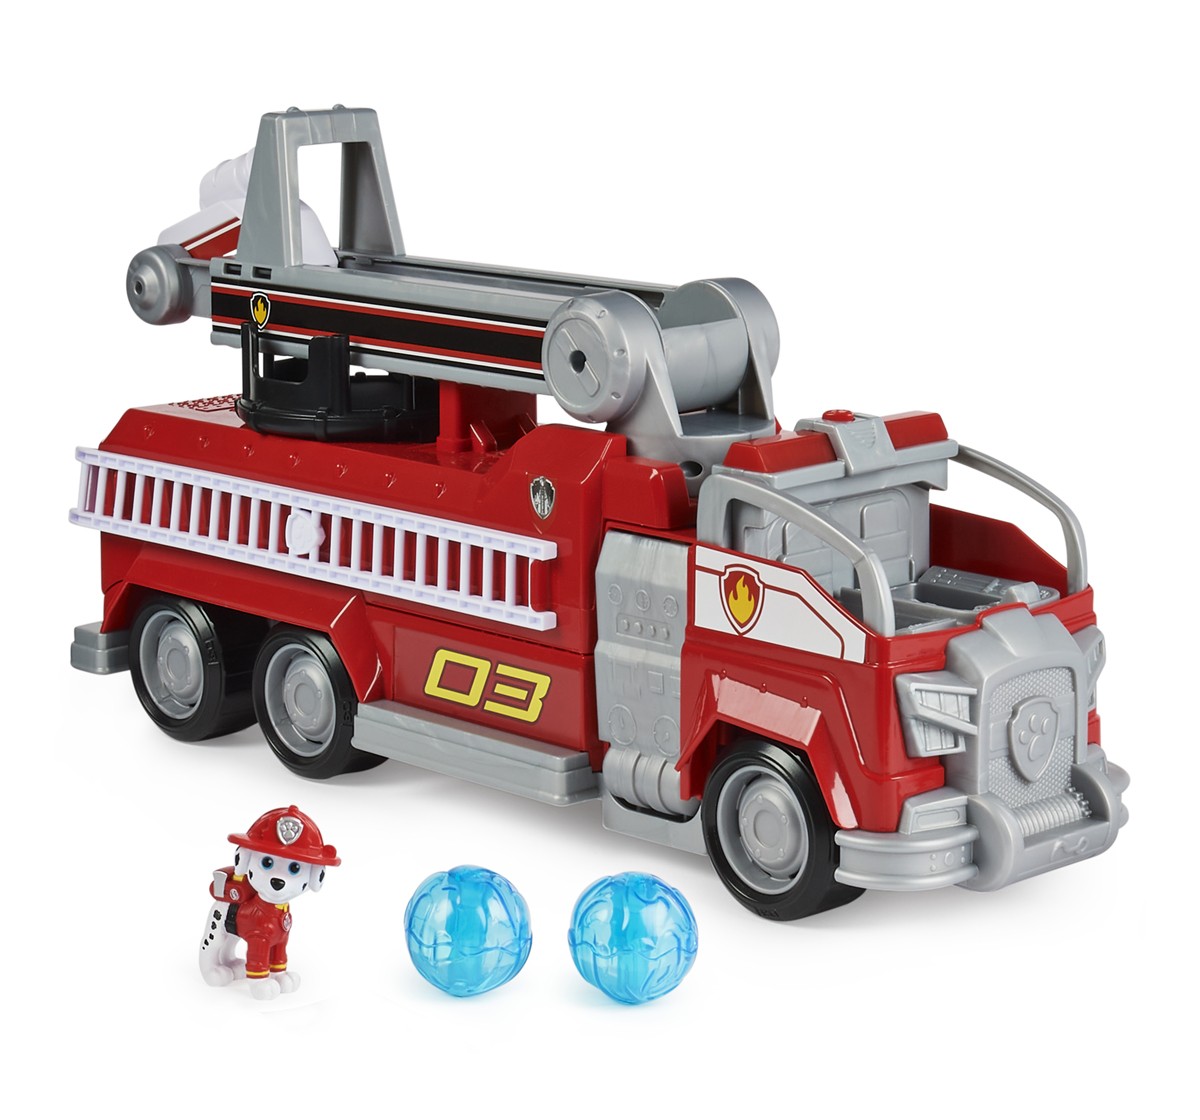 Paw Patrol Movie Deluxe Marshall Firetruck, Multicolour, 3Y+